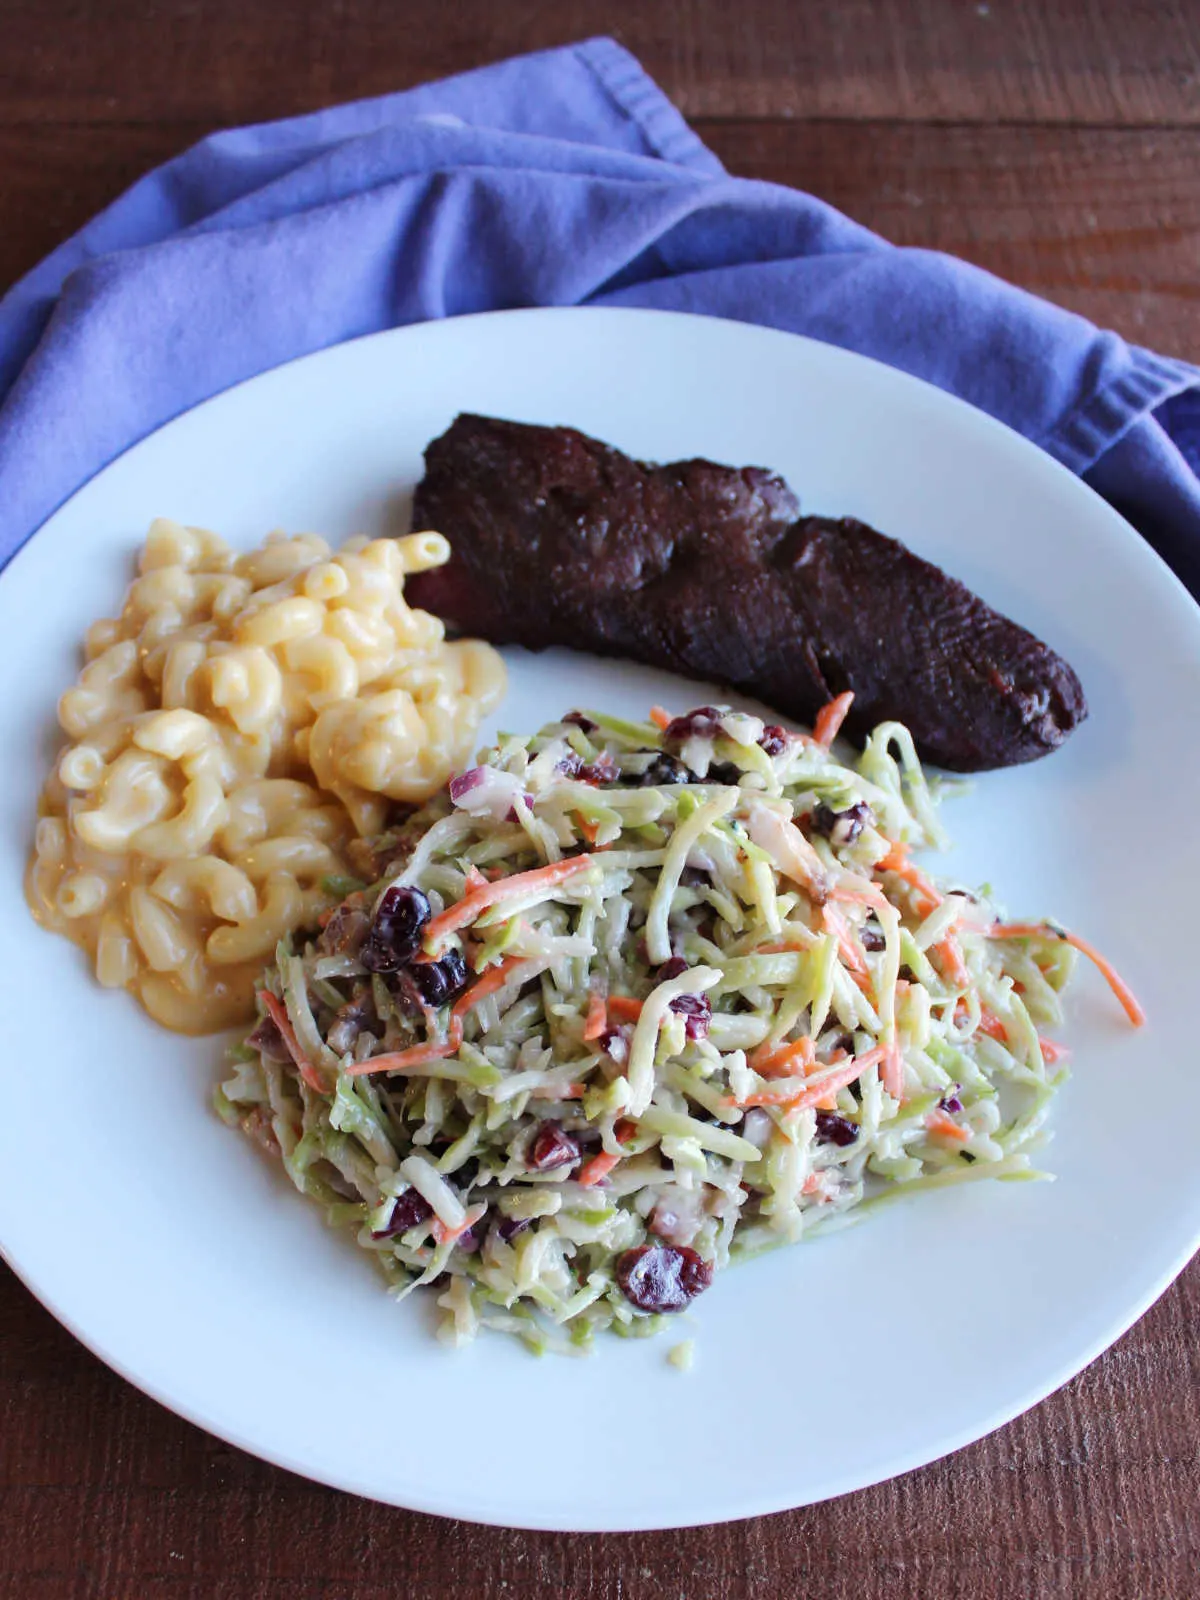 Dinner plate with mac and cheese, broccoli slaw and grilled venison backstrap.